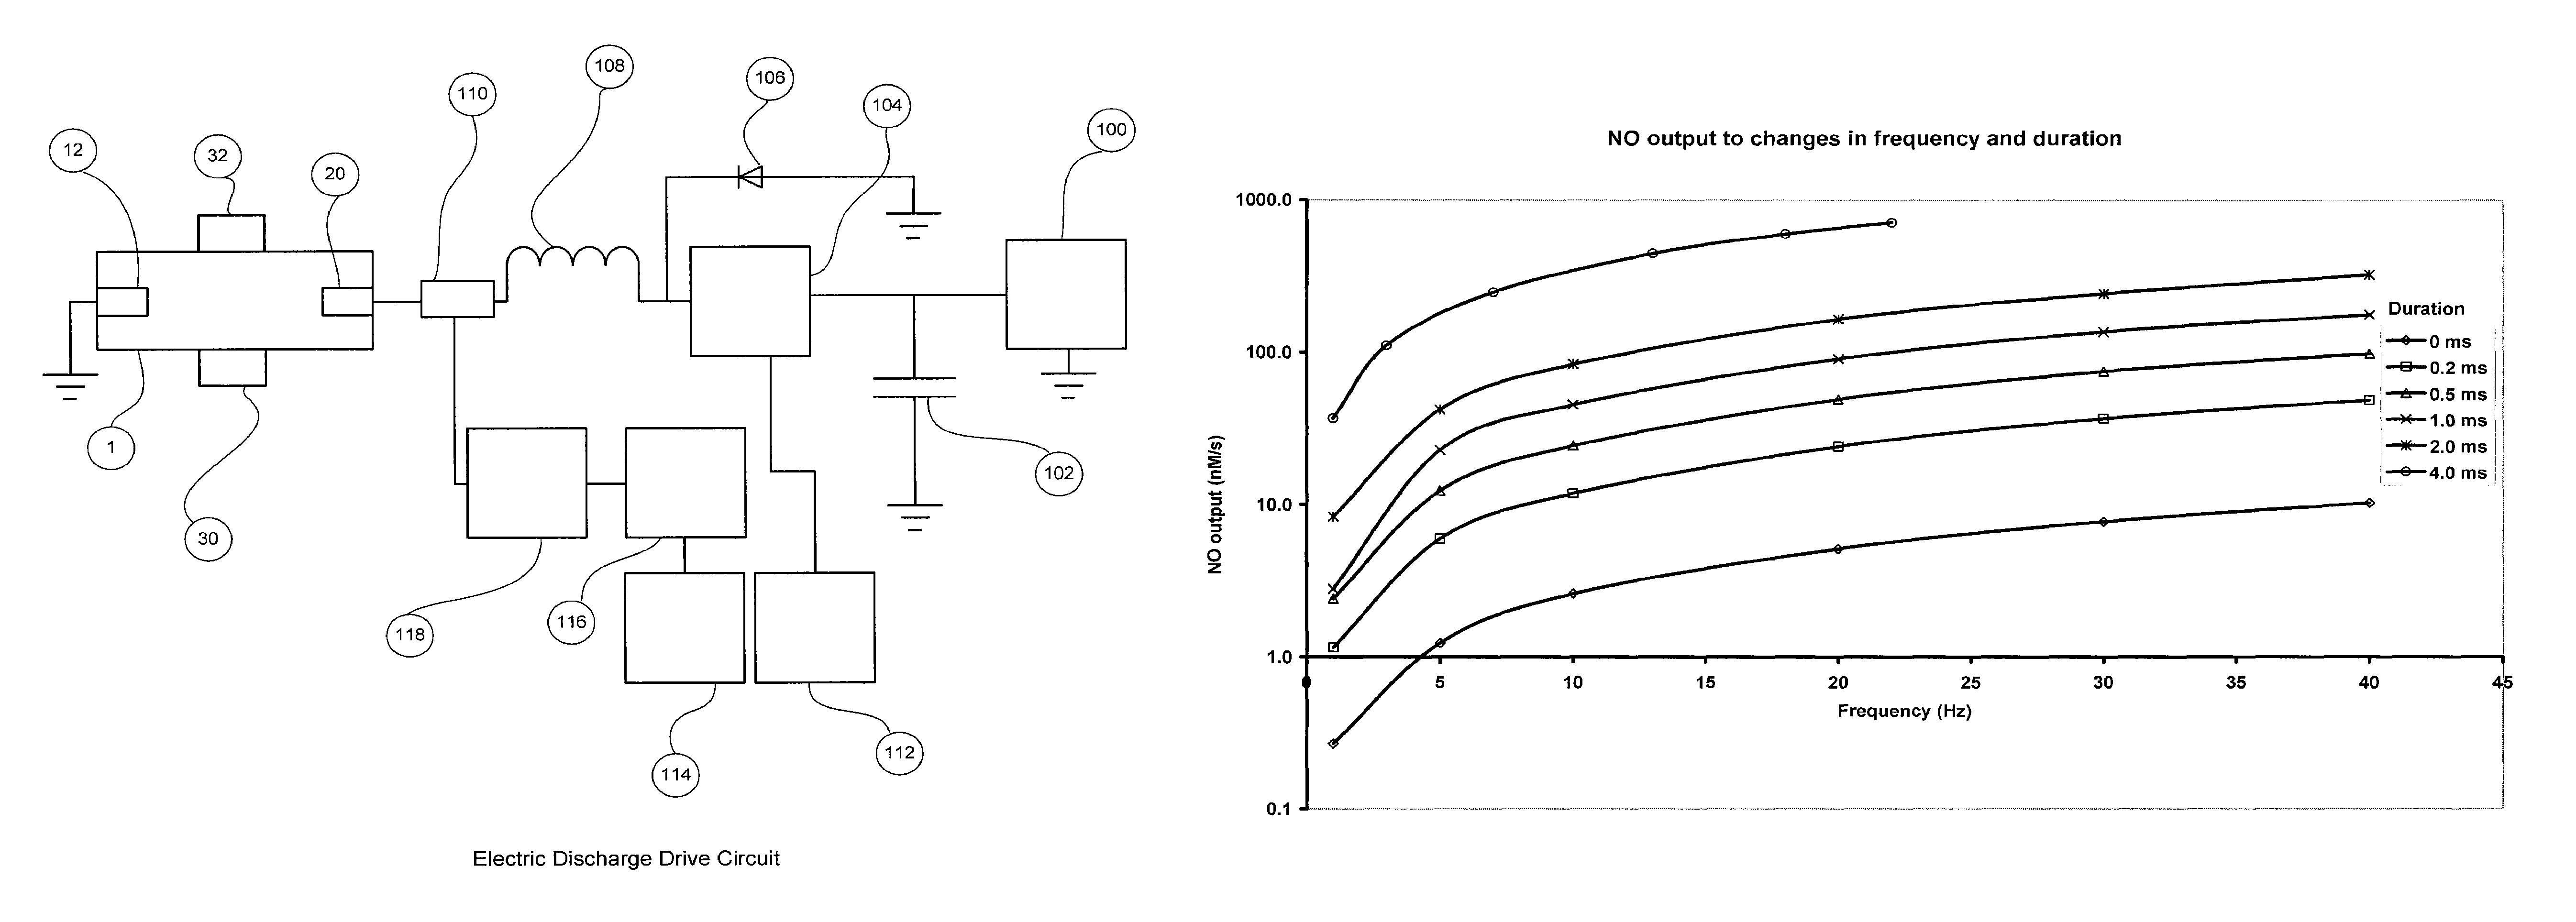 Apparatus and method for generating nitric oxide in controlled and accurate amounts